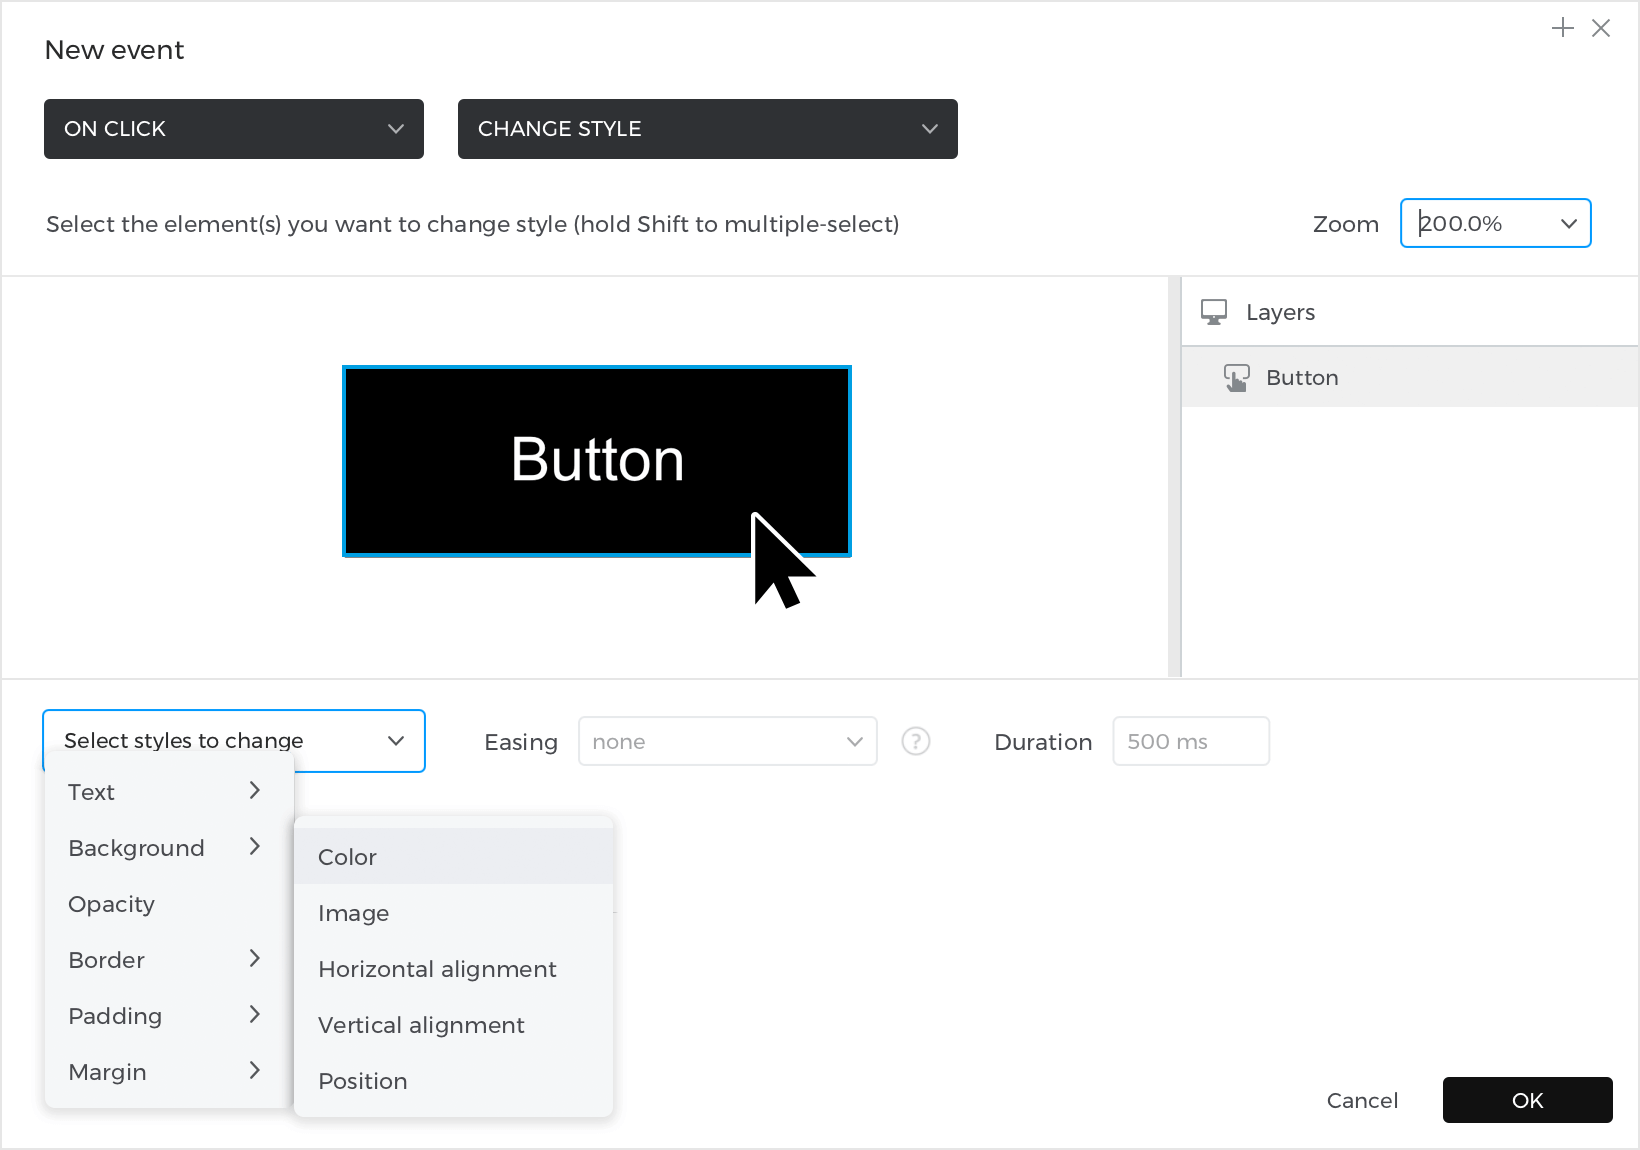 Select the styles to change from the dropdowns